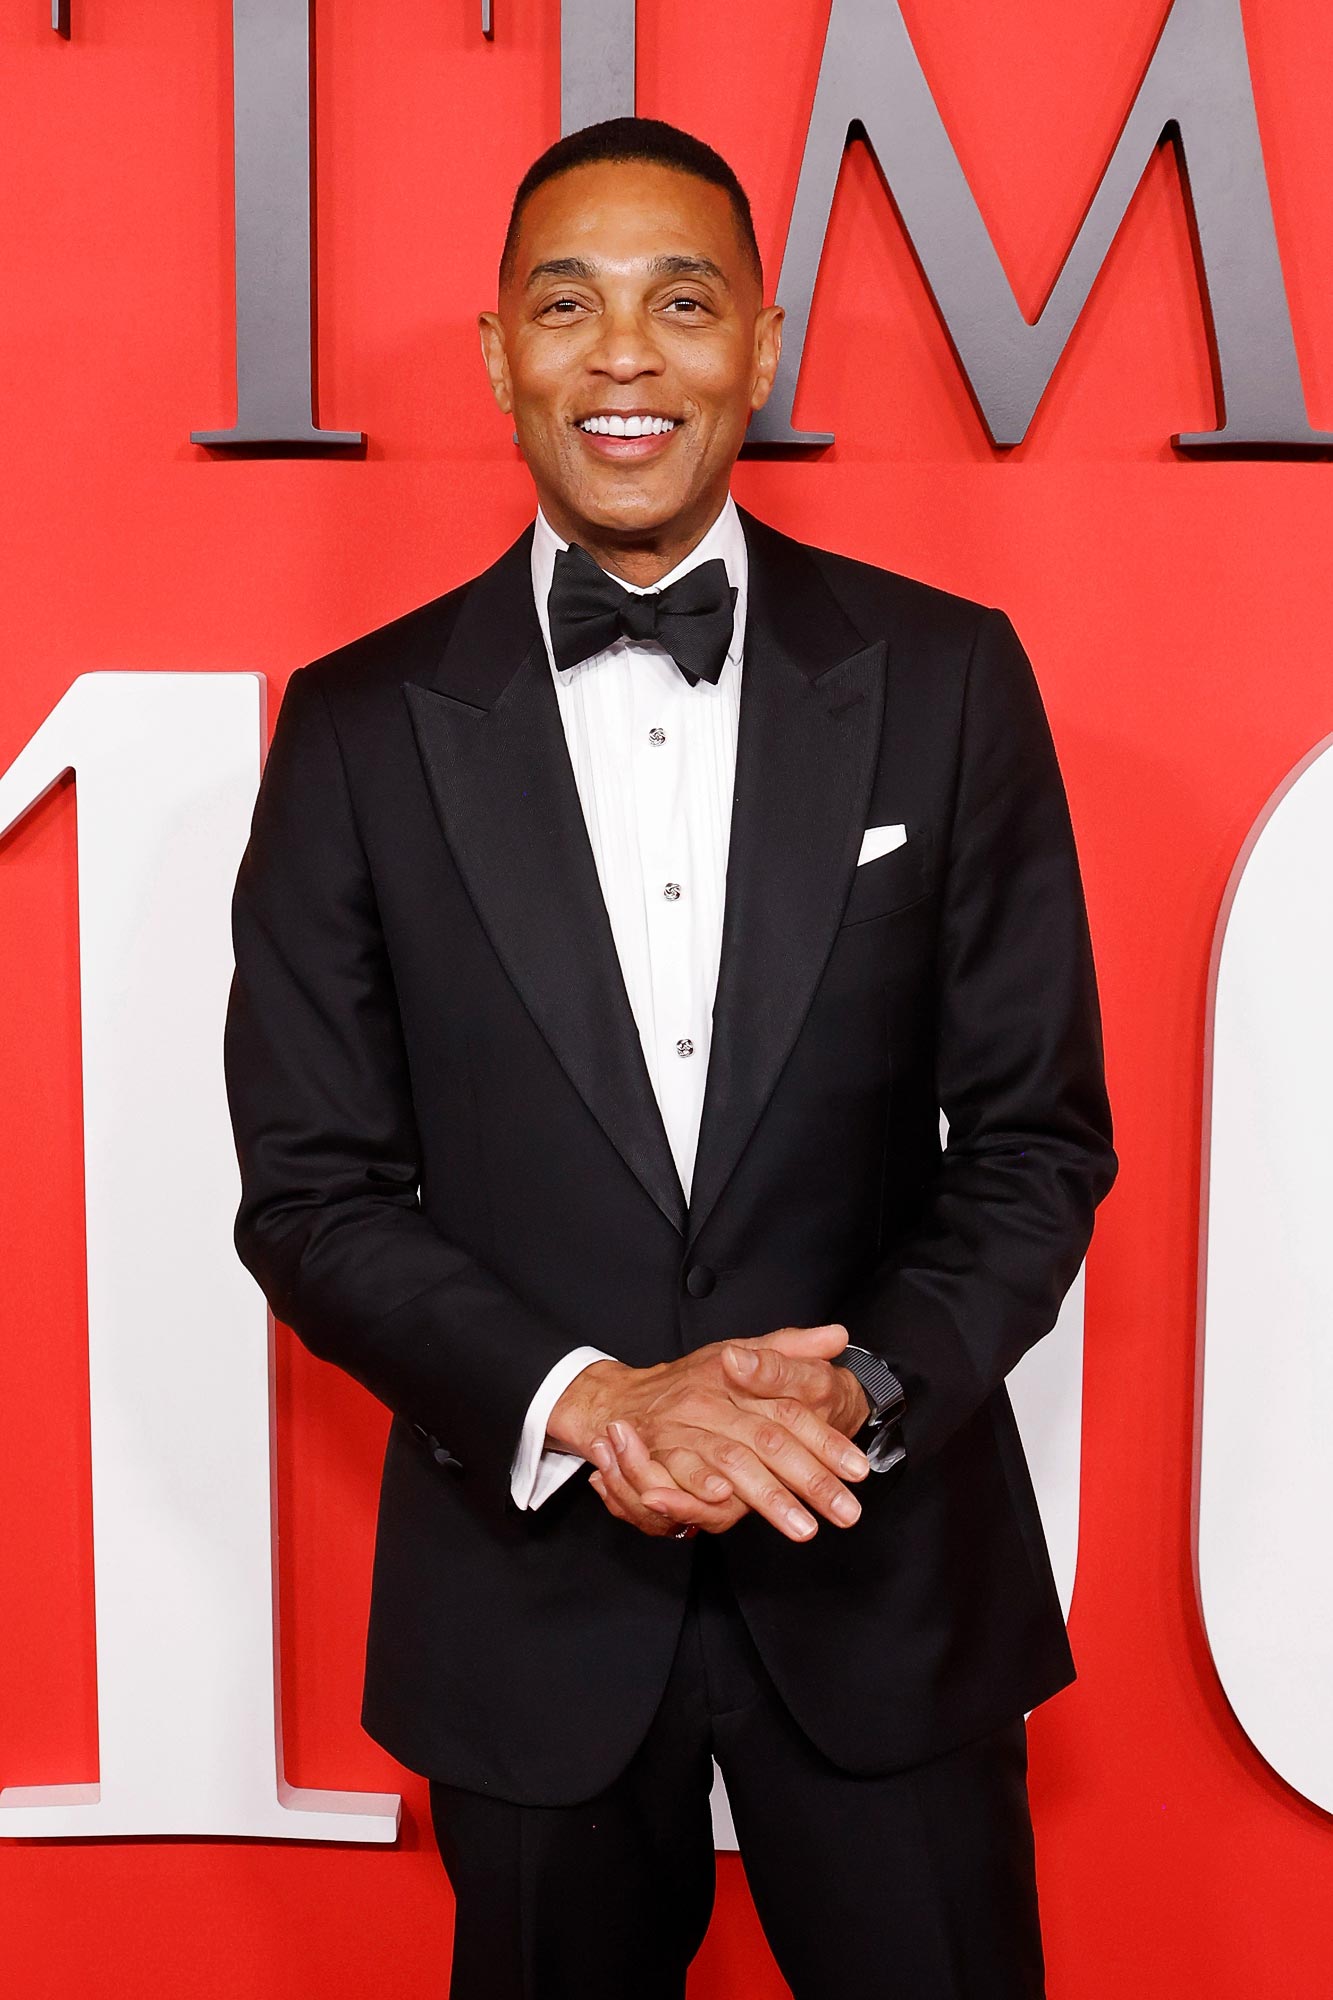 How Don Lemon Cultivated Star Studded Wedding It Wasn t Meant to Be a Celebrity Guest List 276